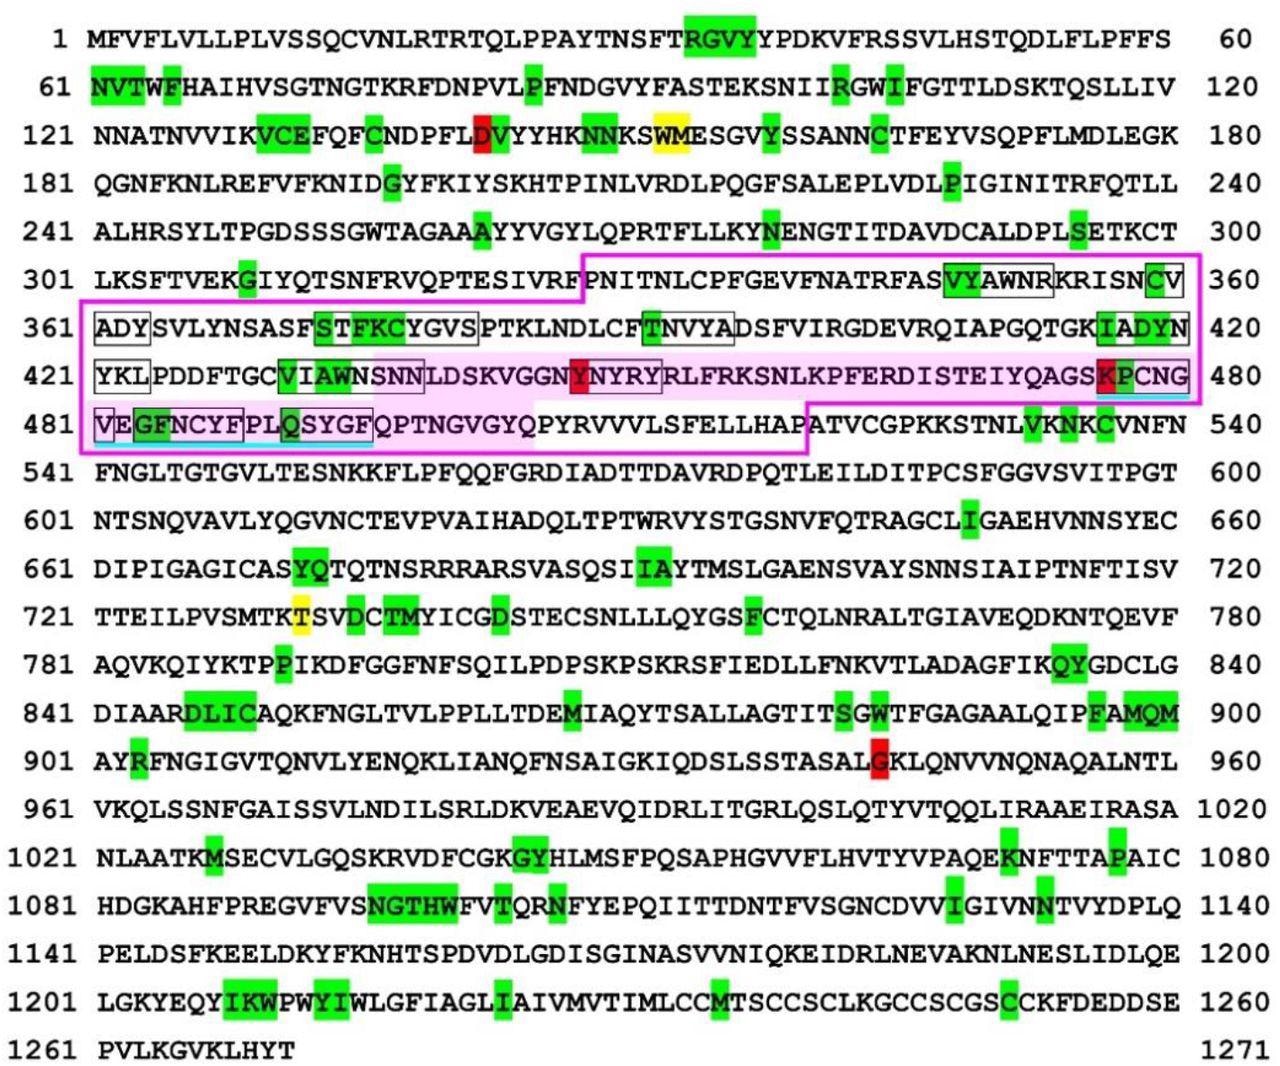 Self/nonself mapping of the SARS-CoV-2 spike protein of the Delta variant. The first amino acids of nonself SCSs are indicated by green (present in RefSeq) or red (new in this variant) shading. Other SCSs with no such indications are self SCSs. The receptor binding domain (RBD) [36] is boxed in pink lines. The receptor binding motif (RBM) [37,38] is shaded in pink. The nonself SCSs in the RBM are boxed in black lines. A potentially important nonself SCS region for vaccine development in the RBD is underlined in blue. For self/nonself mapping of RefSeq, see Otaki et al. (2021)